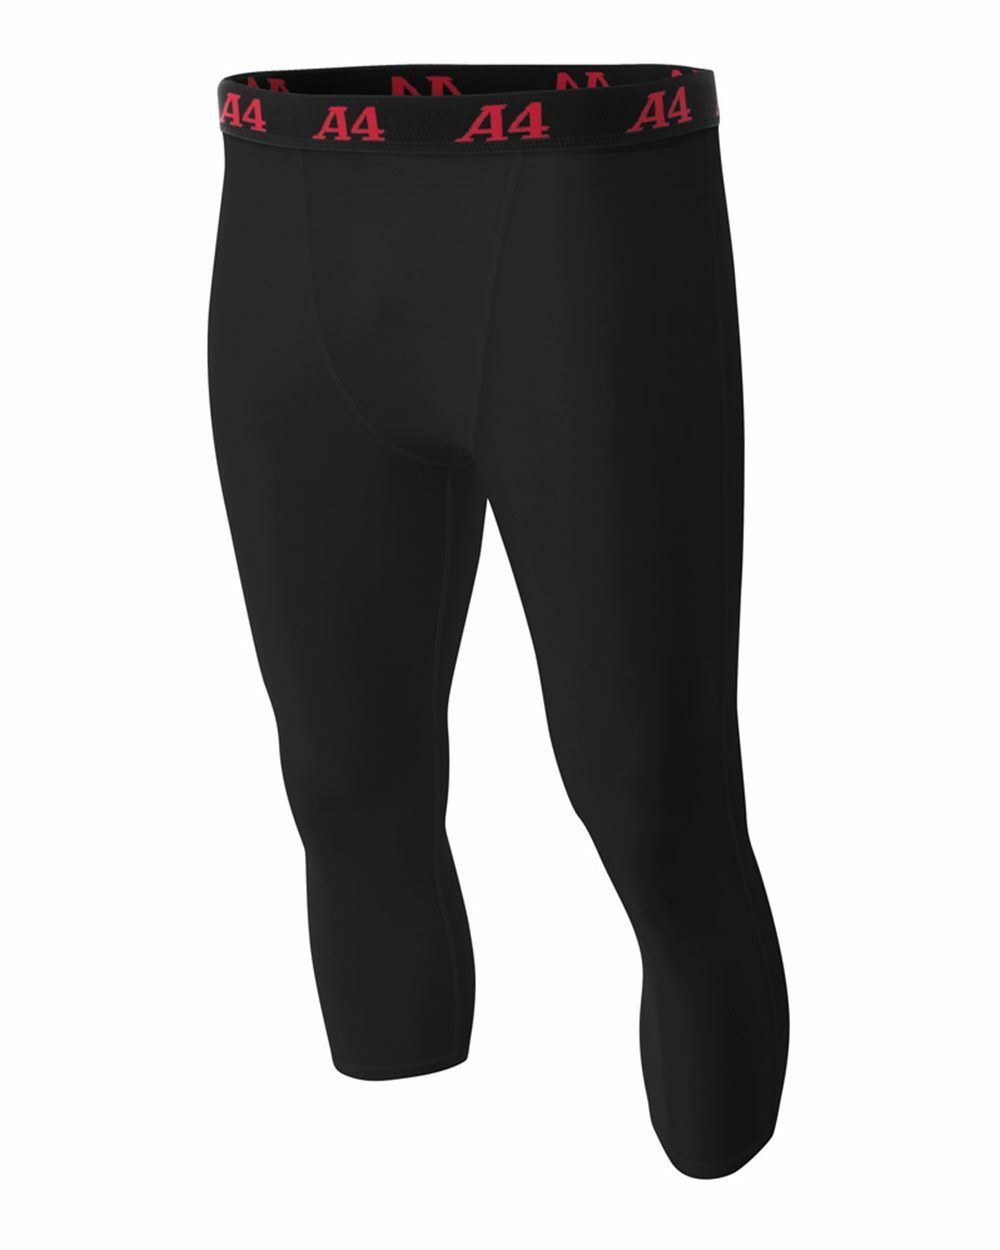 A4  3/4  ADULT  LARGE COMPRESSION TIGHT  - BLACK